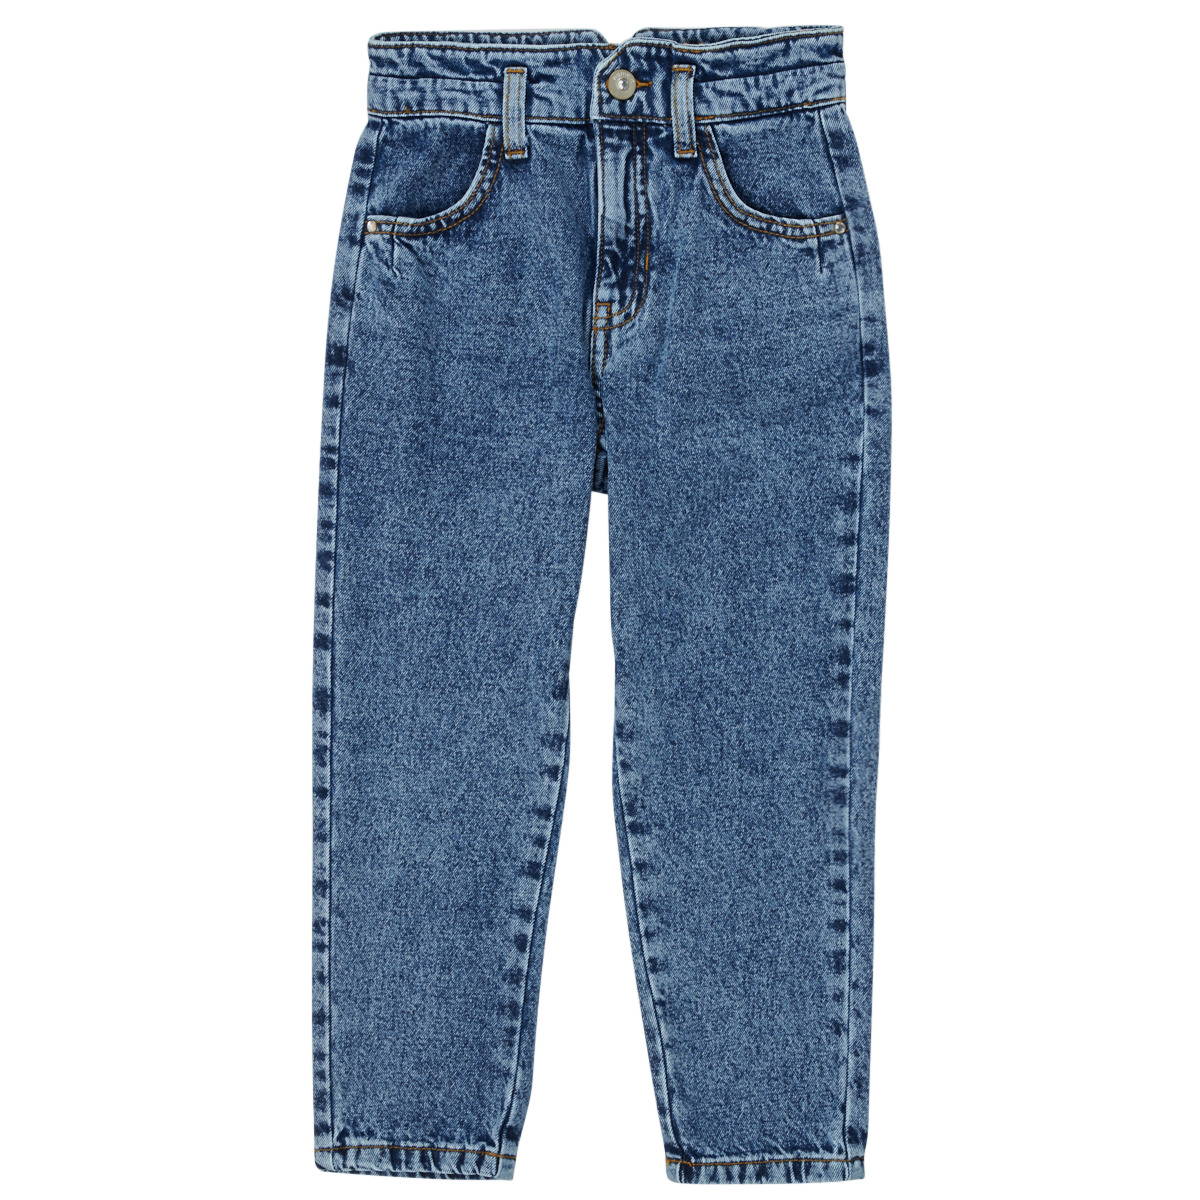 NKFBELLA Europe Clothing Name | jeans - Fast it delivery - Spartoo Blue € Child 36,00 ! straight